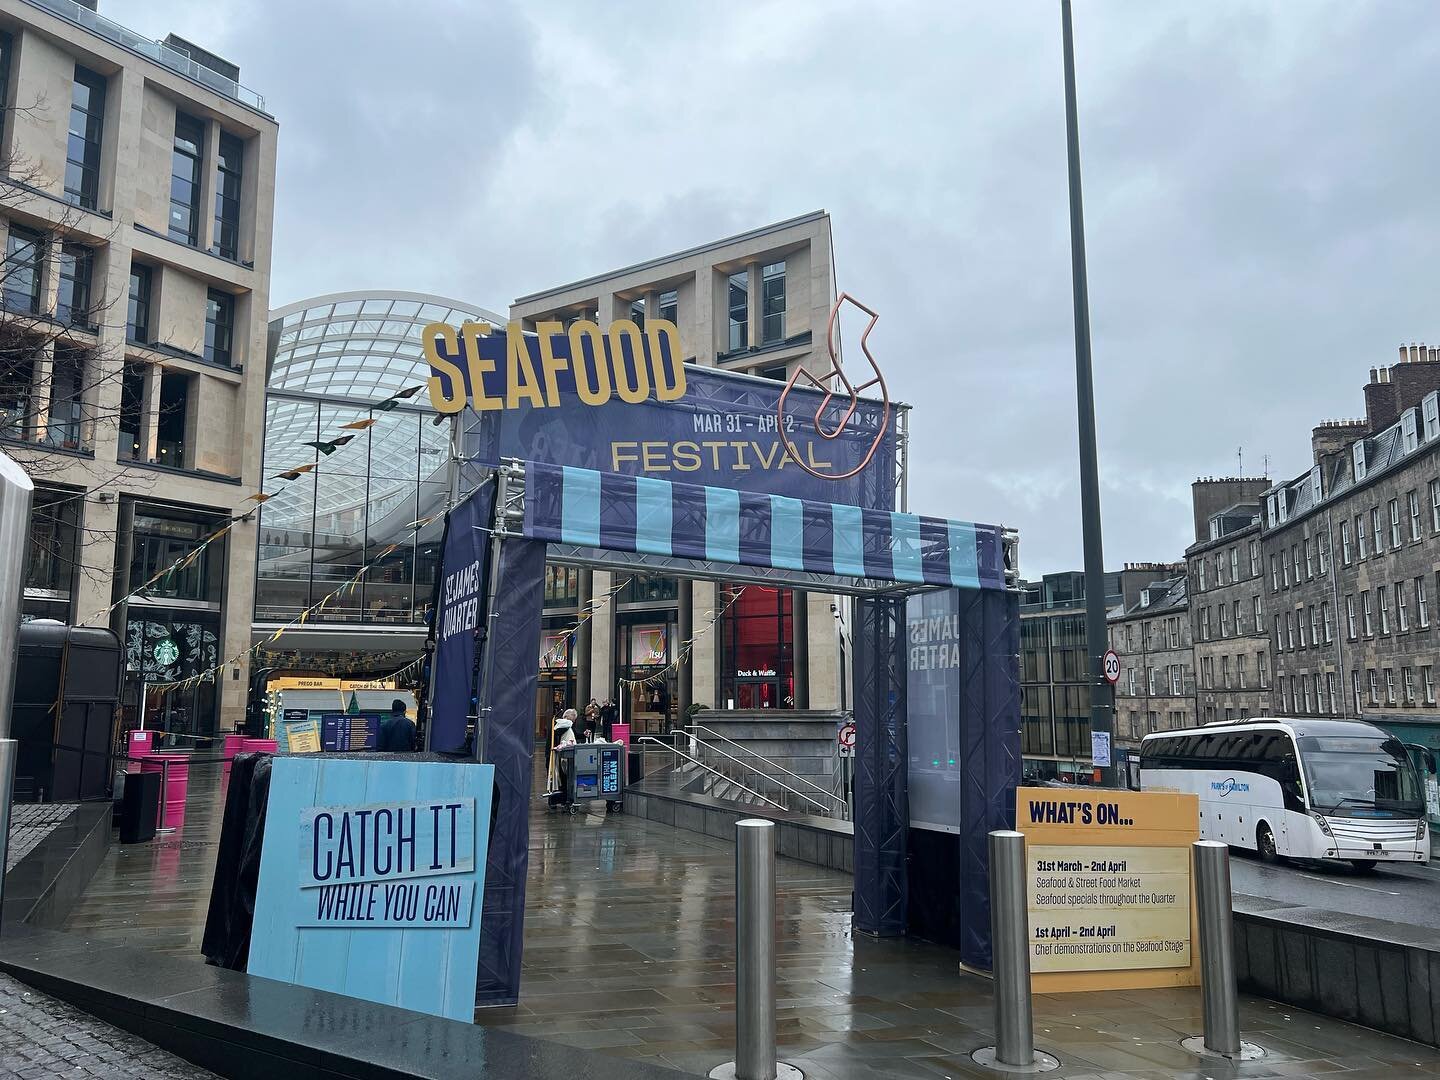 Looking forward to another great day @stjamesquarter for the seafood festival. 👌🏻🐟🦞 #seafood #seafoodfestival #edinburgh